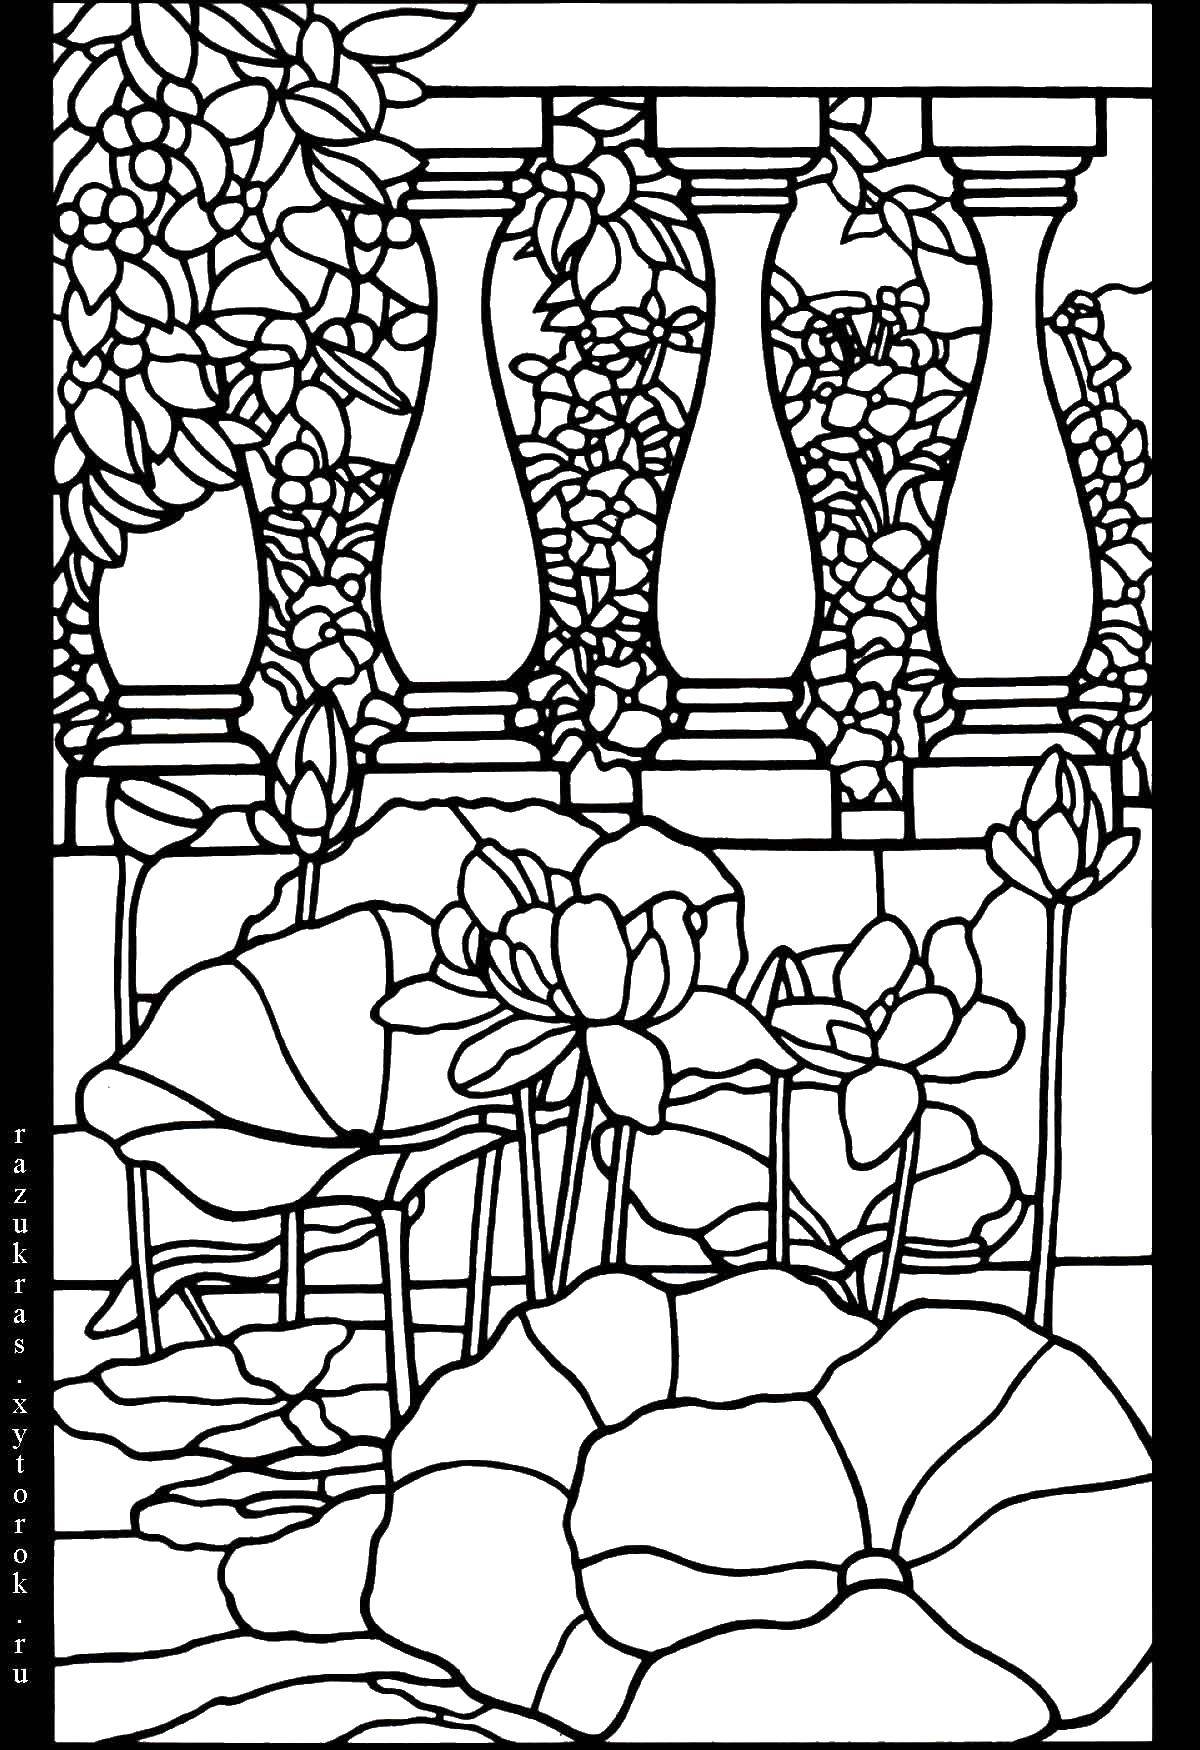 Coloring Flowers. Category stained glass. Tags:  stained glass, wood, flowers.